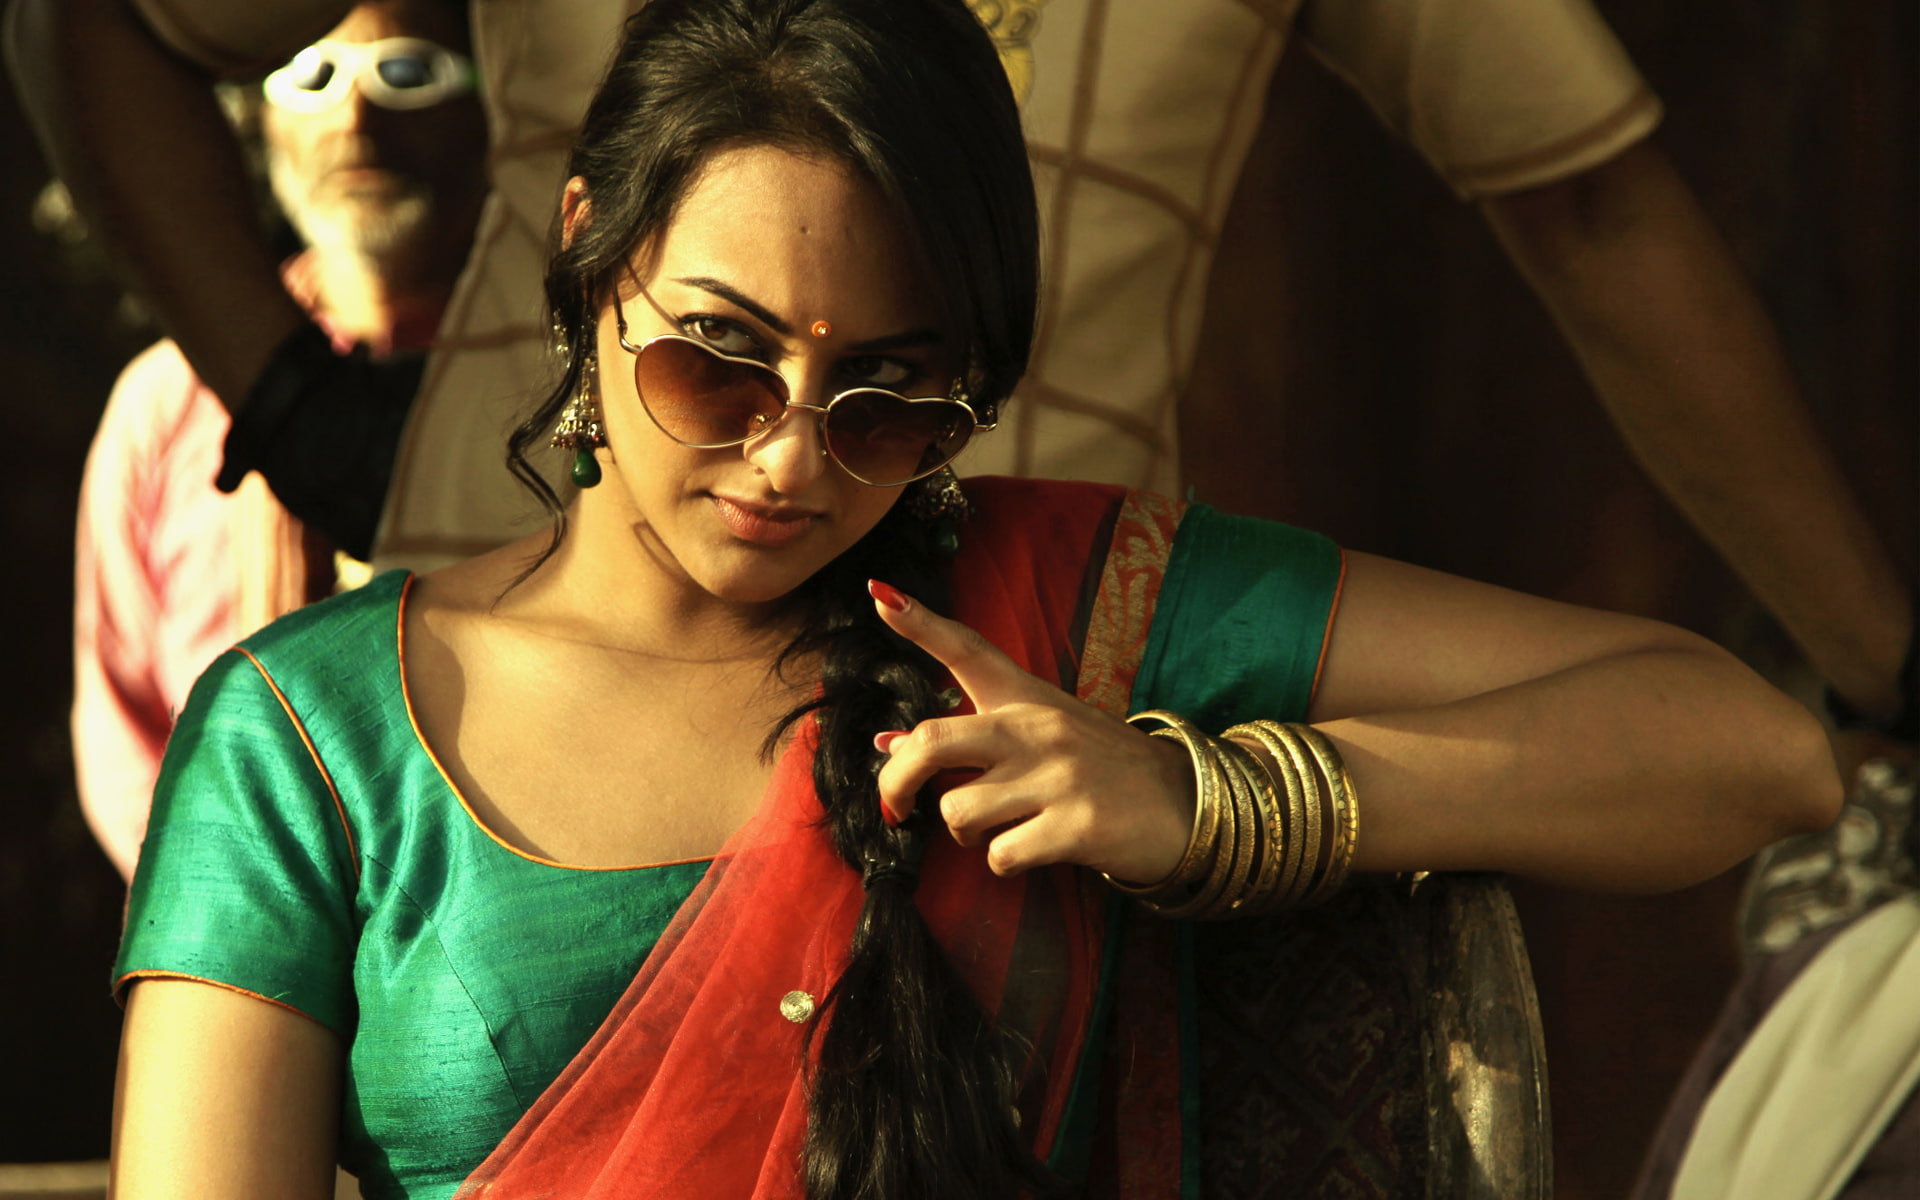 Sonakshi Sinha in Joker, glasses, fashion, one person, young adult